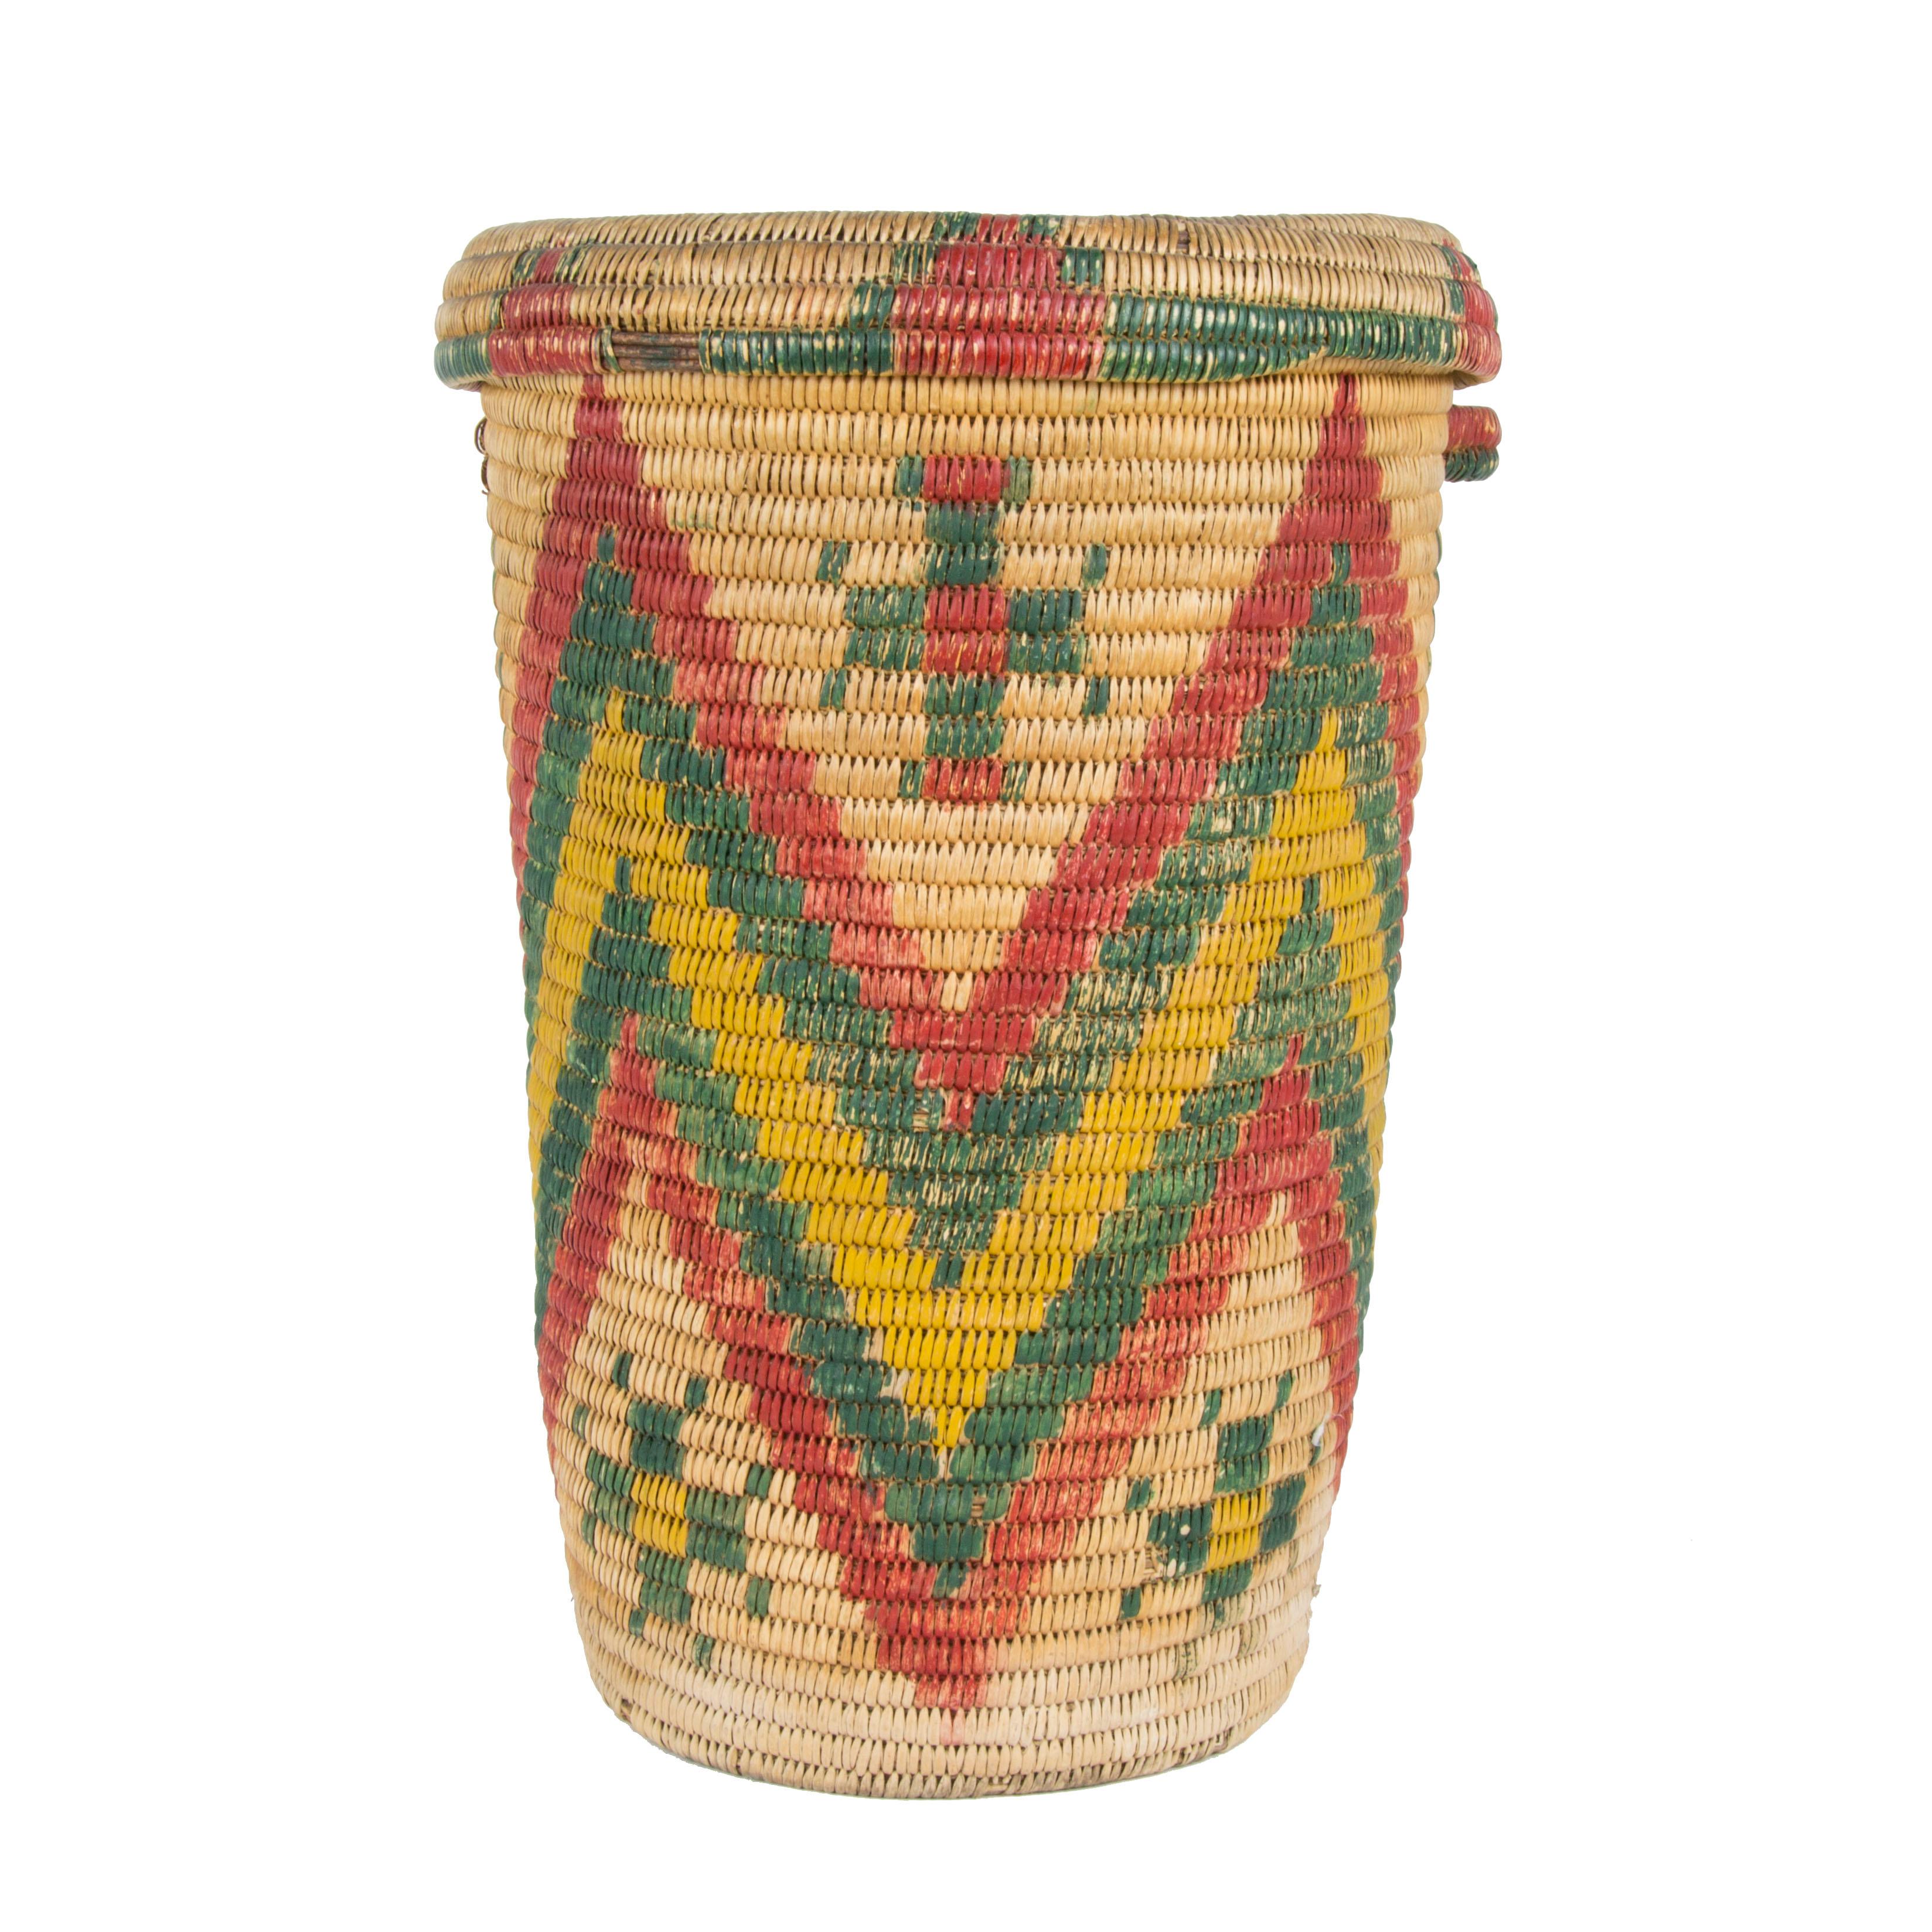 Jicaralla Apache waste basket with handles. Originally dyed willow. As was faded, at a later date est. 1920. Outside was painted to match original. Made in Dulce, NM. Historic and functional.

Period: Last quarter of the 19th century.

Origin: